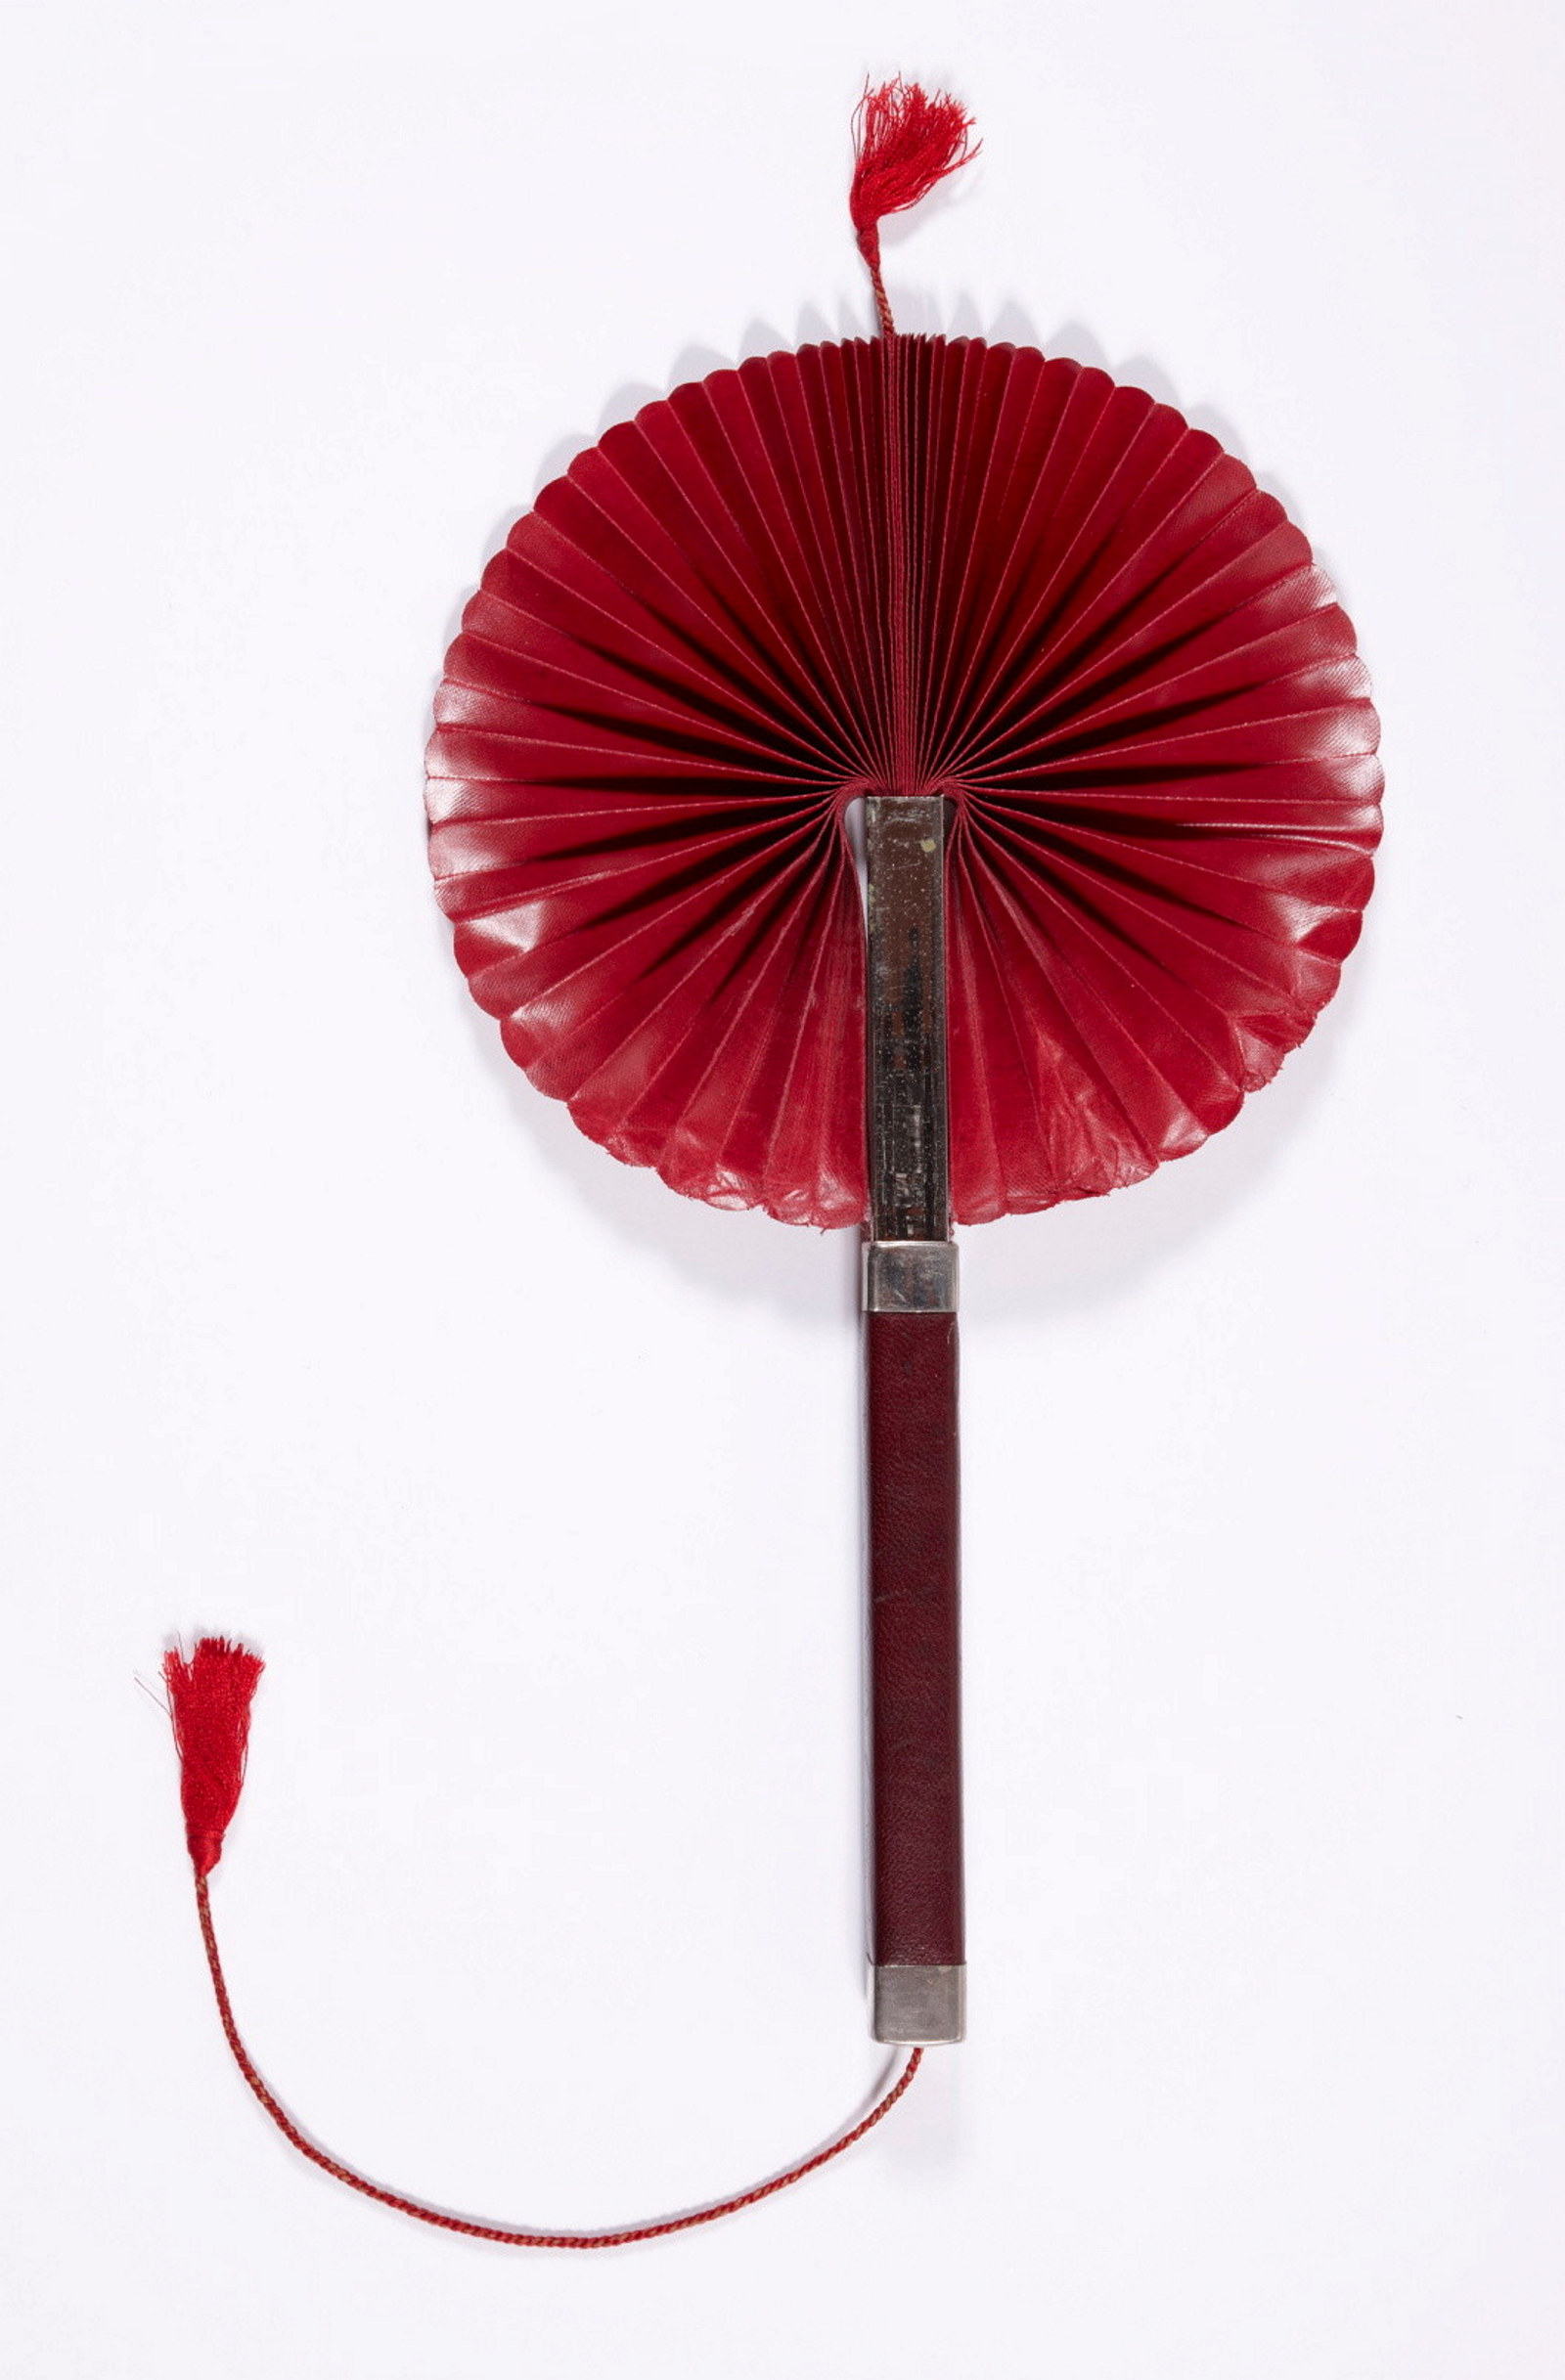 Cockade fan. Wood with leatherette and fabric. Likely Chinese, early 1900s.